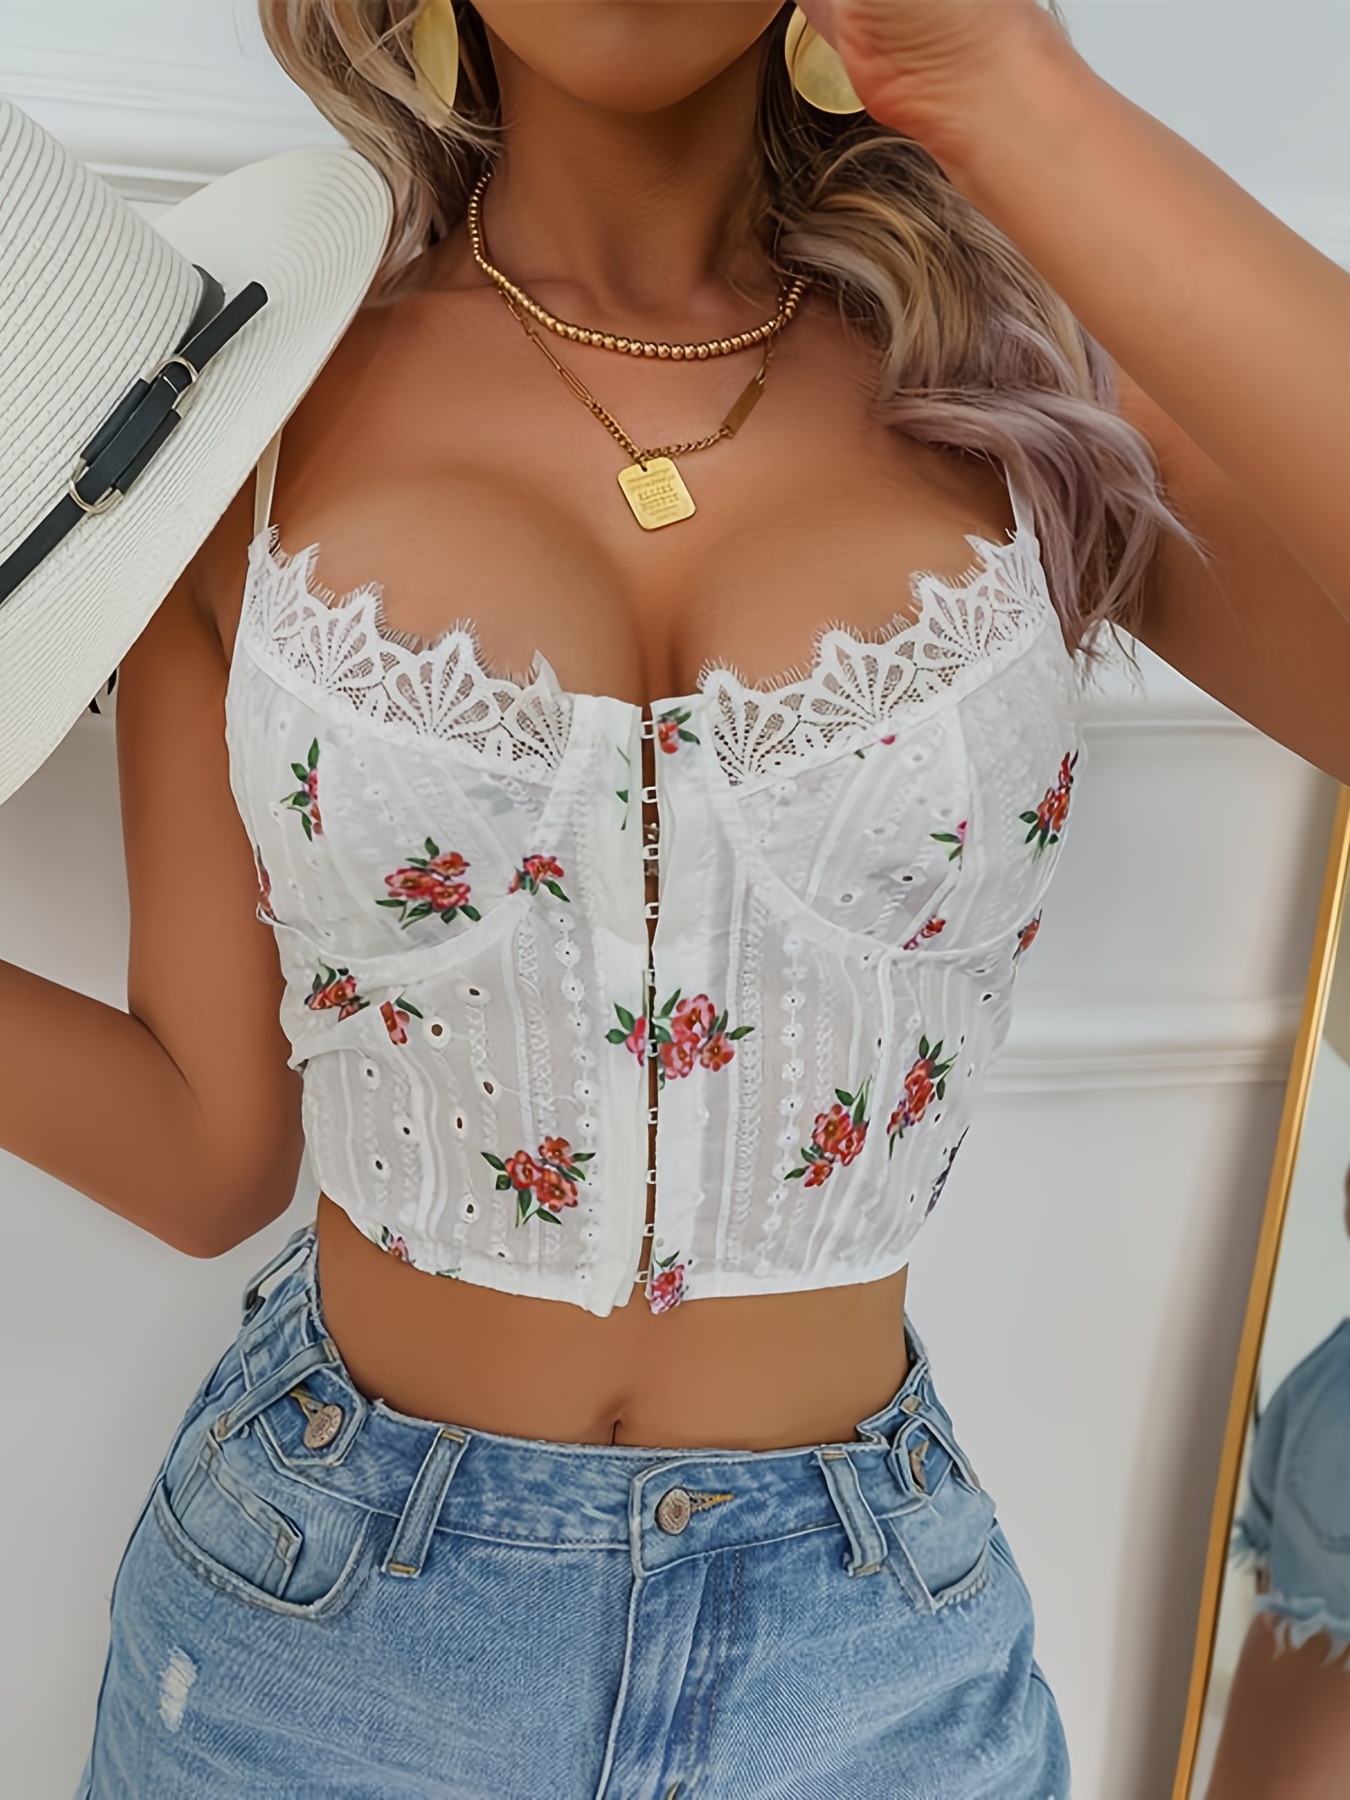 Women Hollow Out Lace Cami Lace Tube Top Flower Camisoles Sexy